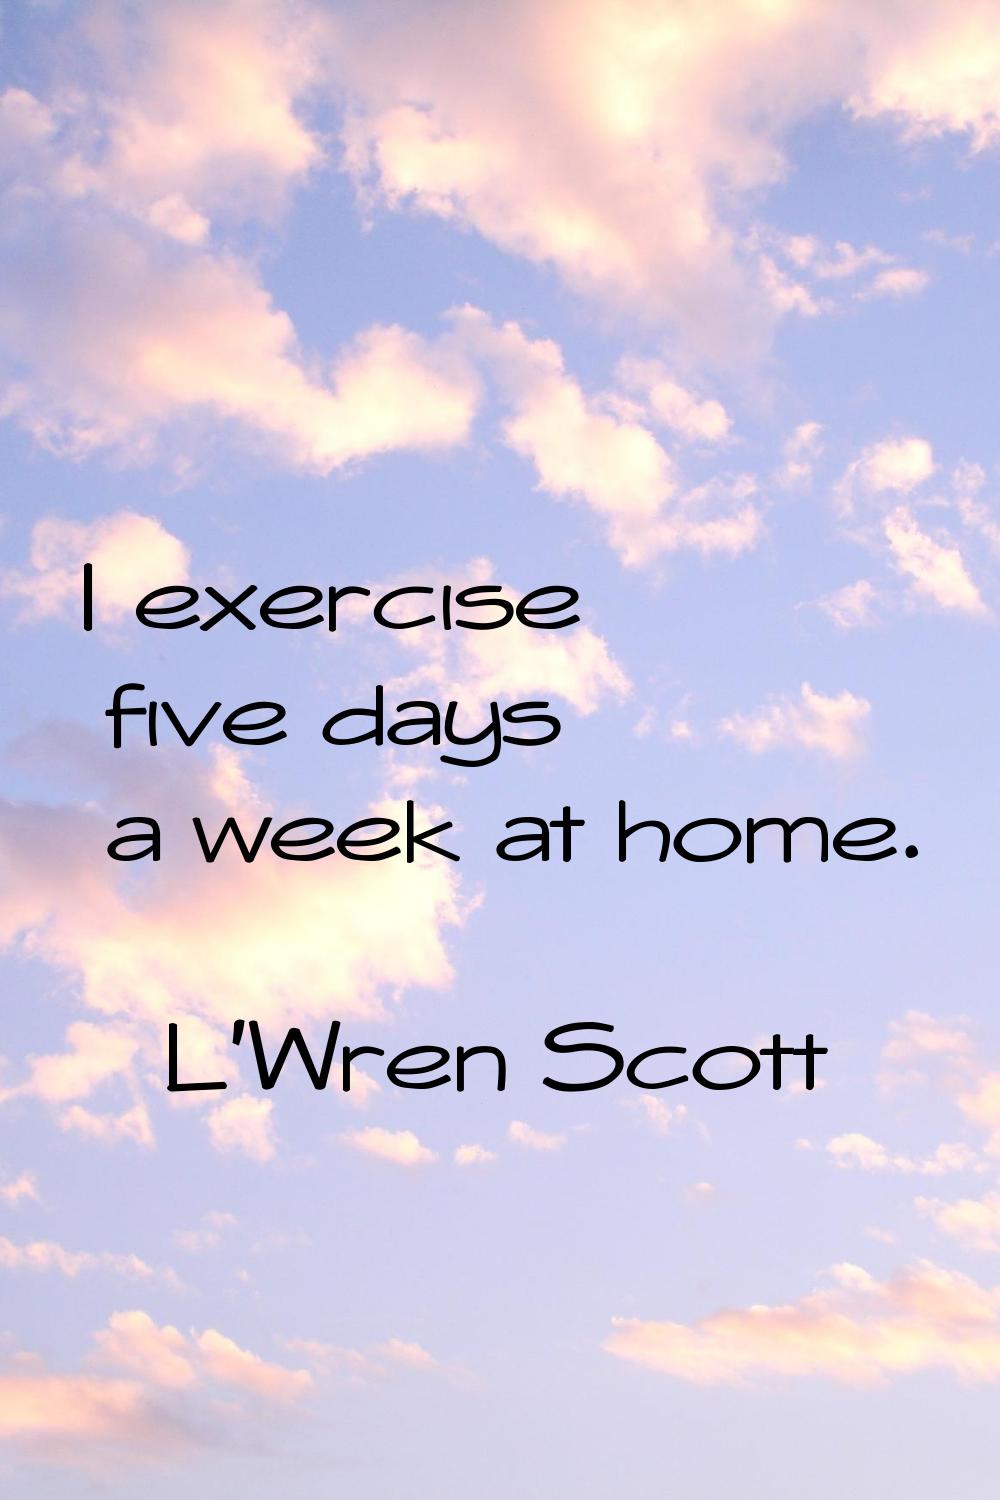 I exercise five days a week at home.